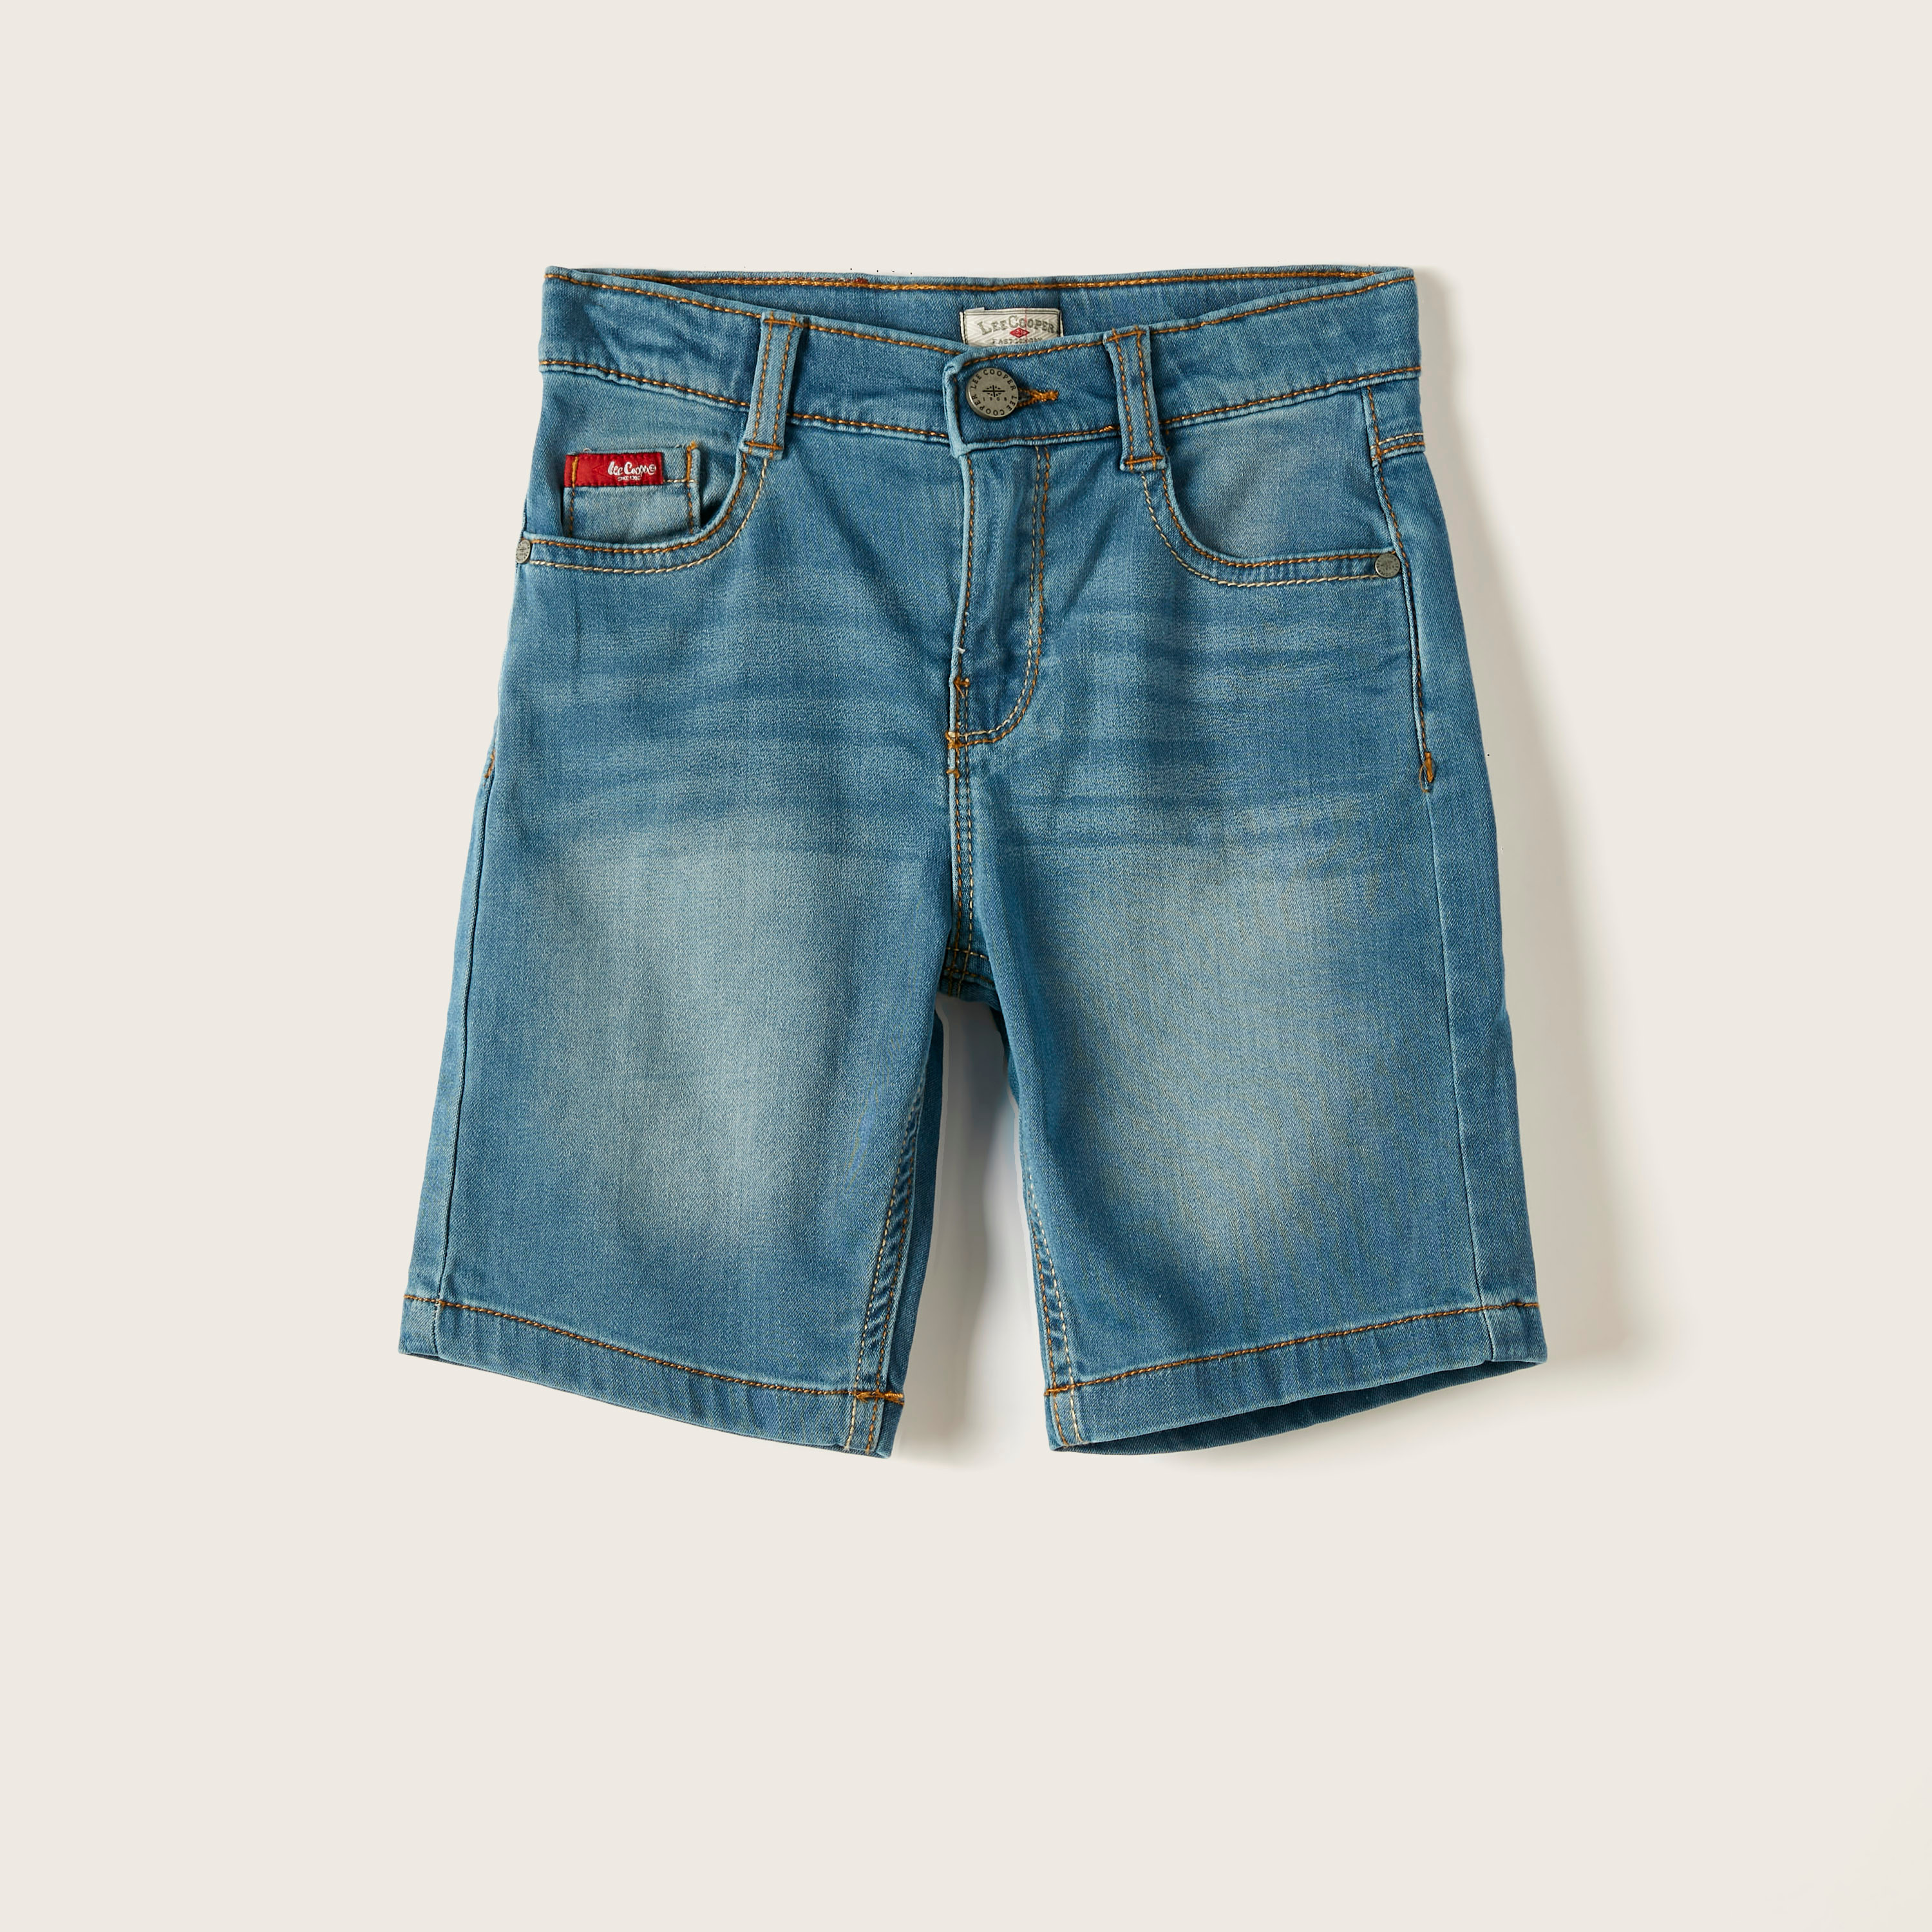 LEE COOPER - CUT OFFS - DISTRESSED STYLE - SIZE 10 | Clothes design,  Fashion, Outfits